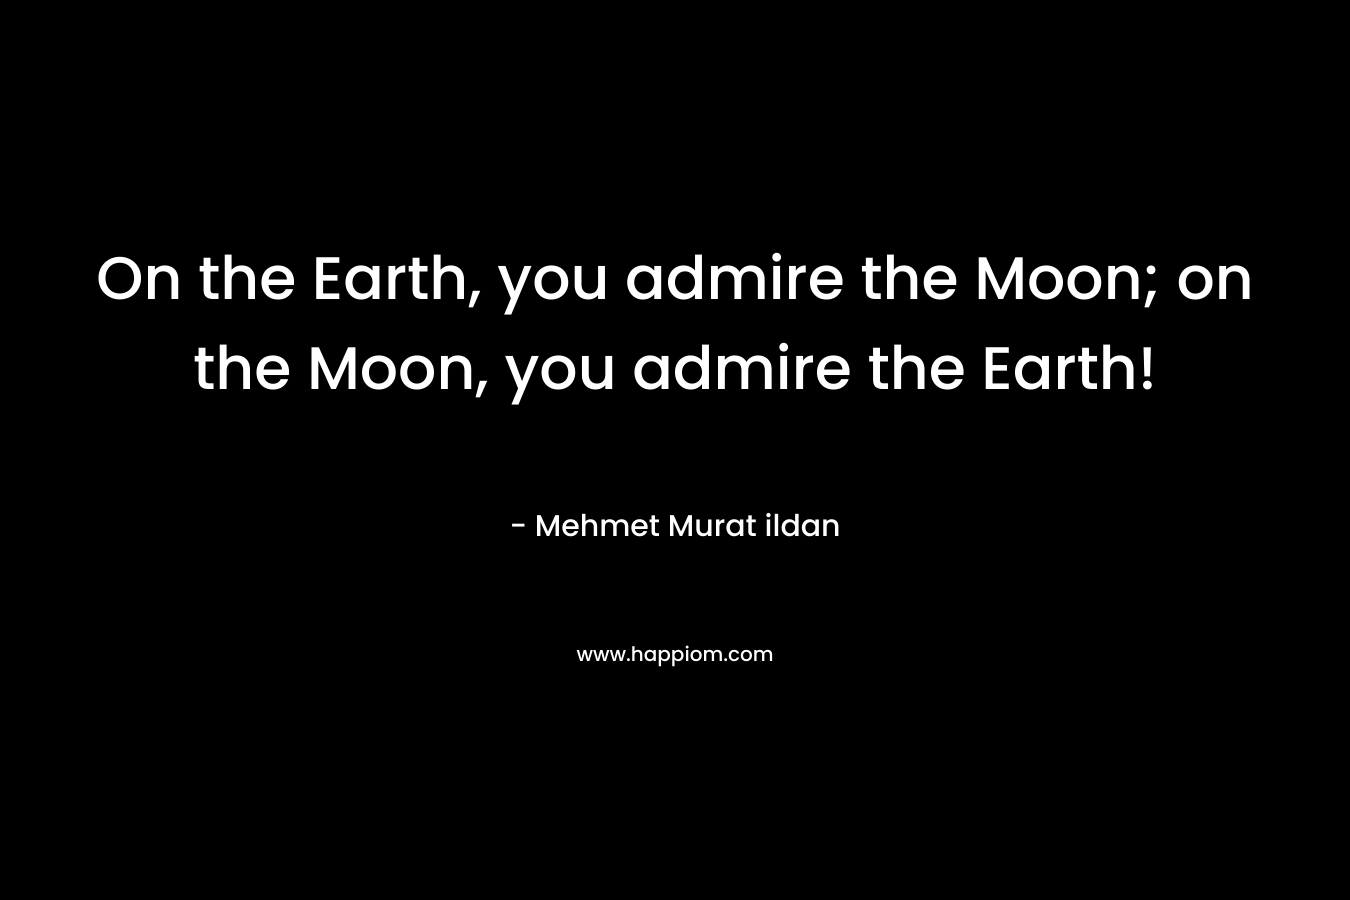 On the Earth, you admire the Moon; on the Moon, you admire the Earth!